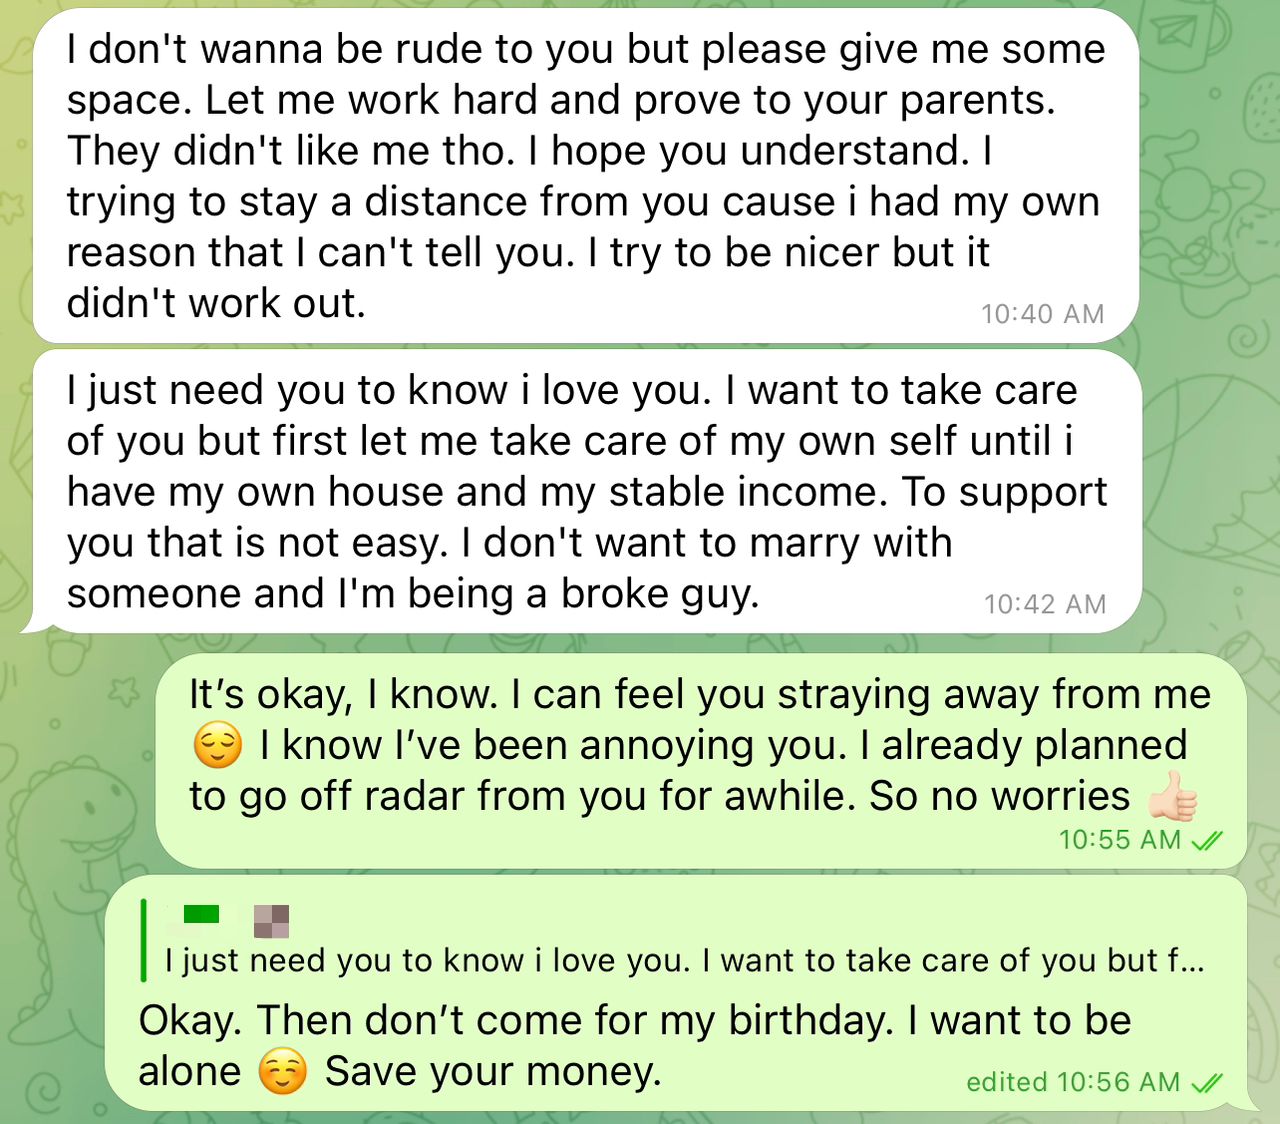 Whatsapp chat screenshot of a man asking for space from his girlfriend.